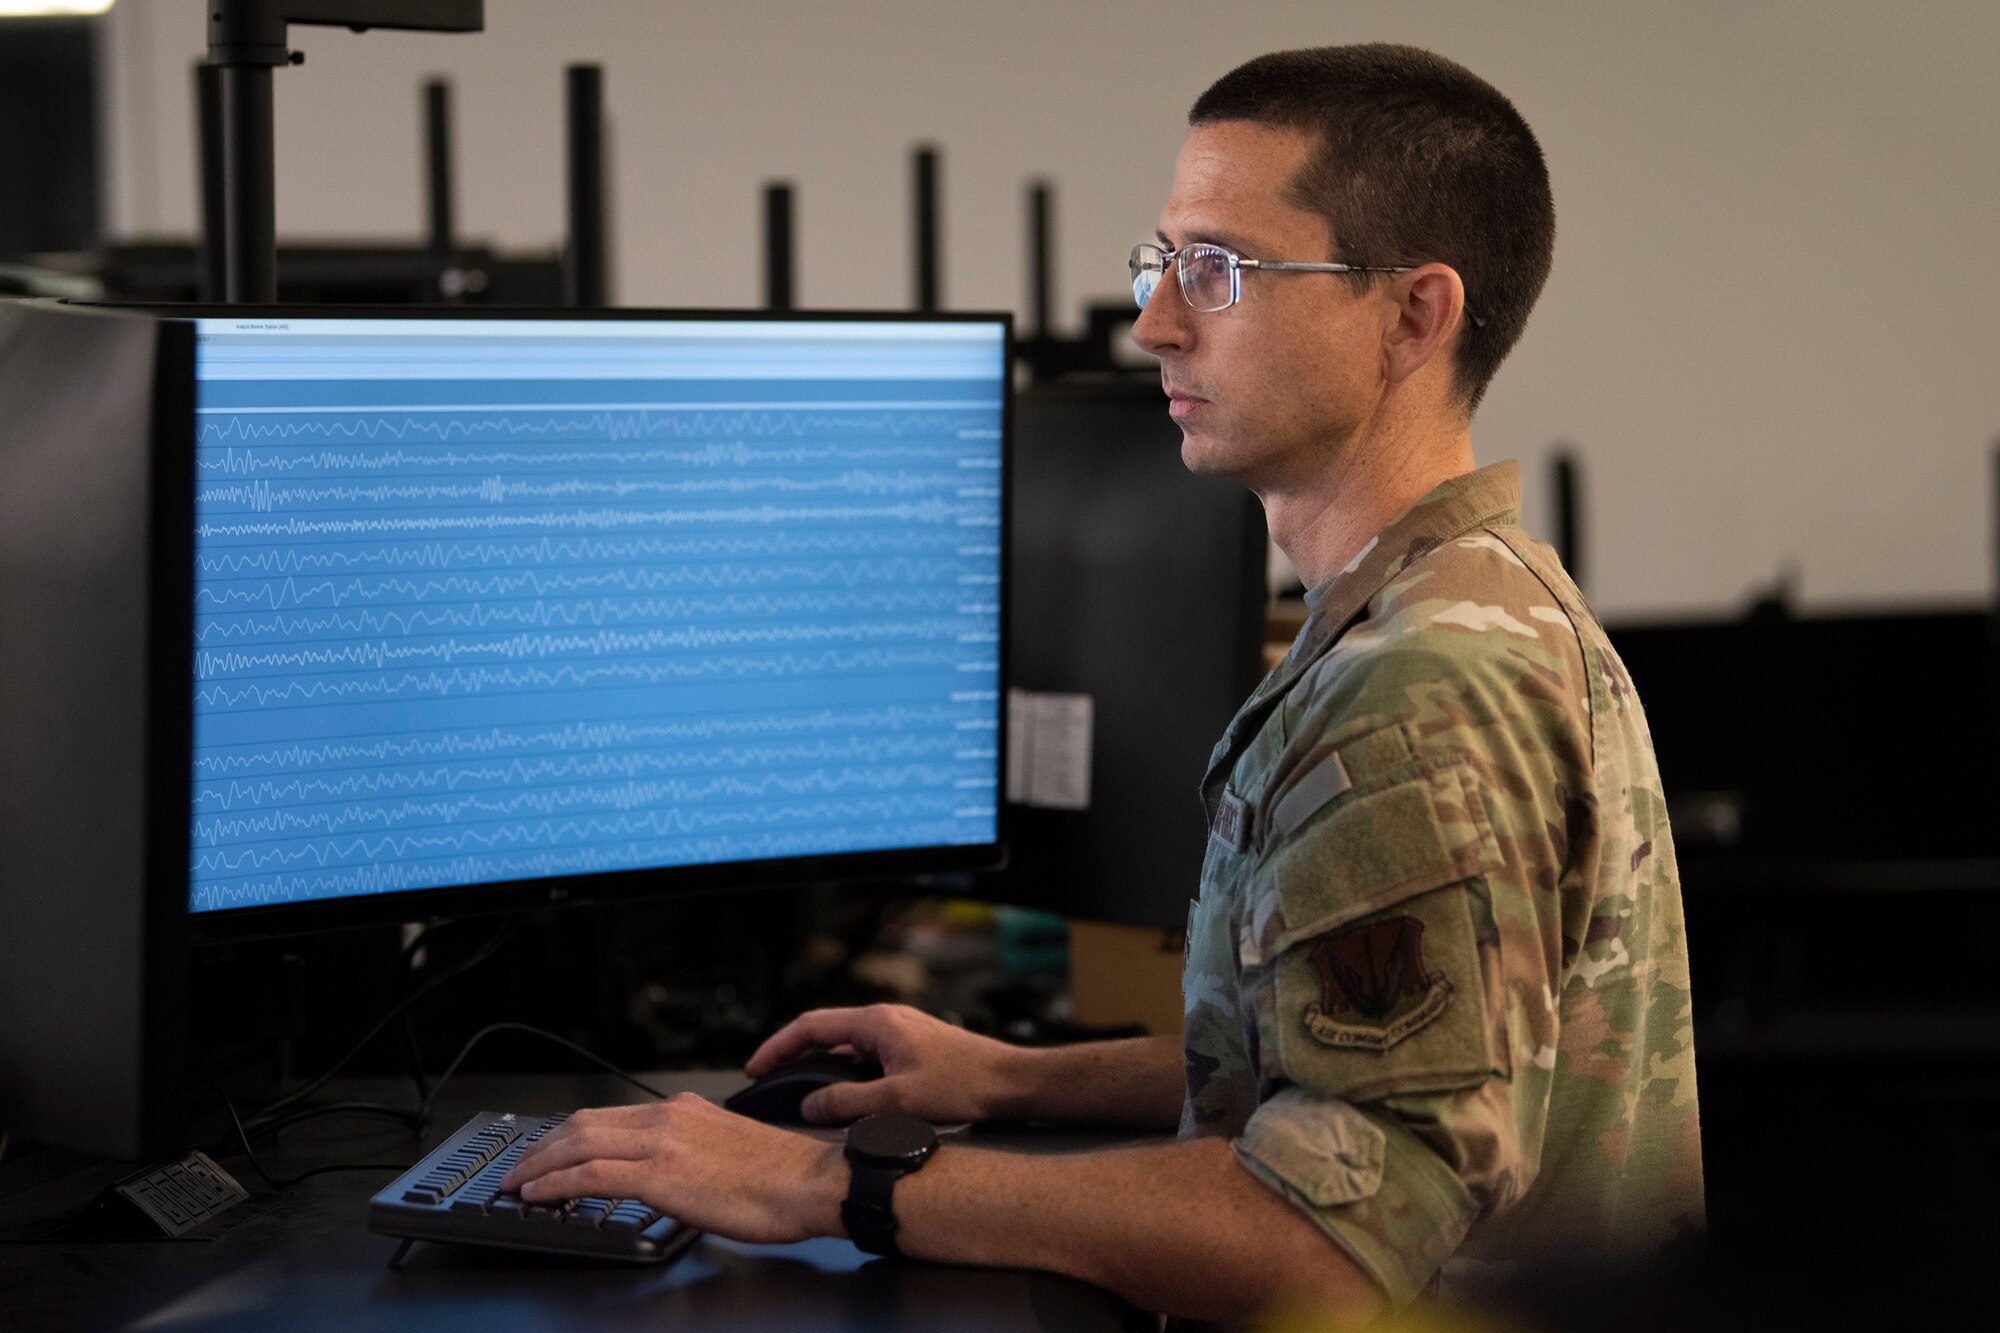 Airman 1st Class Ryan Miskowiec, a Scientific Applications Specialist assigned to the 22nd Surveillance and Analysis Squadron, analyzes seismic phenomenology as part of his job at the Air Force Technical Applications Center, Patrick Space Force Base, Fla.  Miskowiec, who has a doctorate degree in Kinesiology, has been with the nuclear treaty monitoring center since May 2023 and is the oldest E-3 in his organization.  (U.S. Air Force photo by Matthew S. Jurgens)